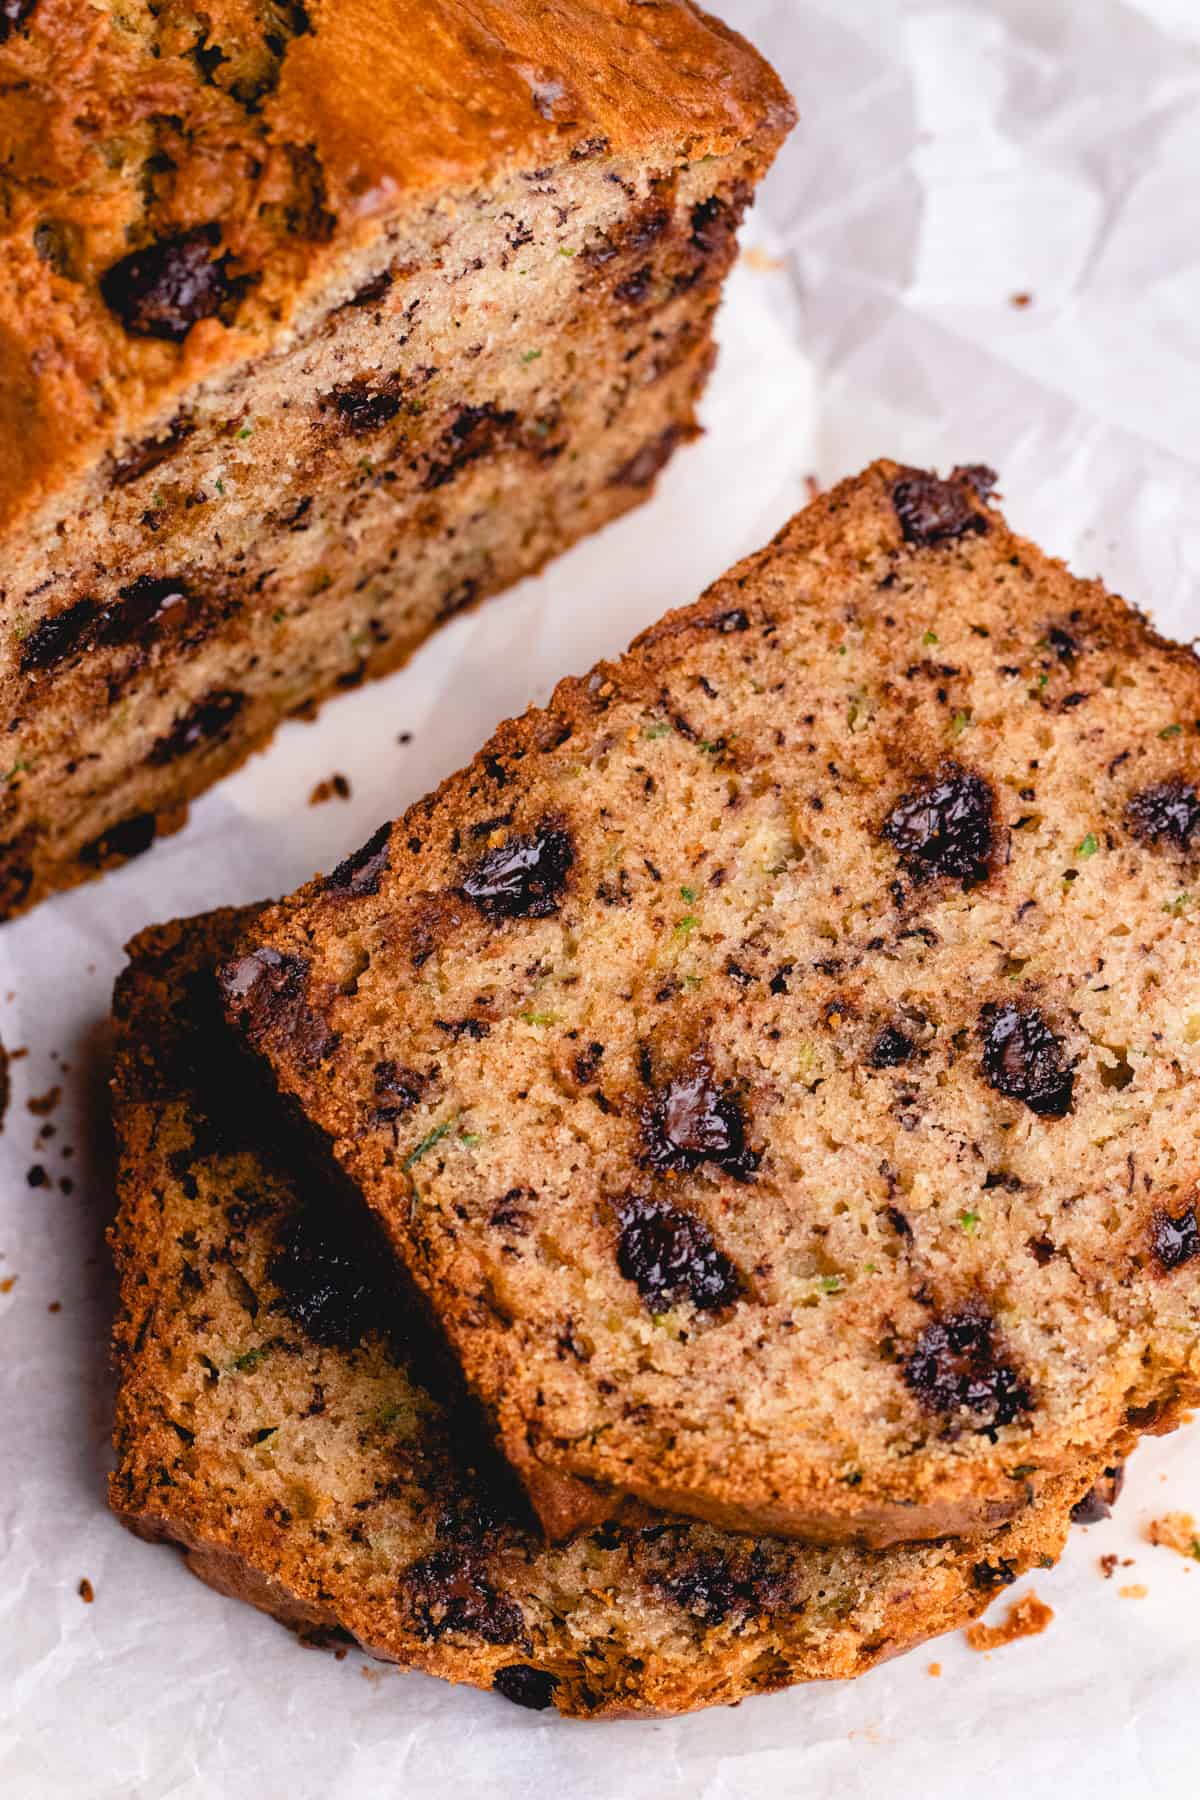 Sliced zucchini banana bread with chocolate chips.